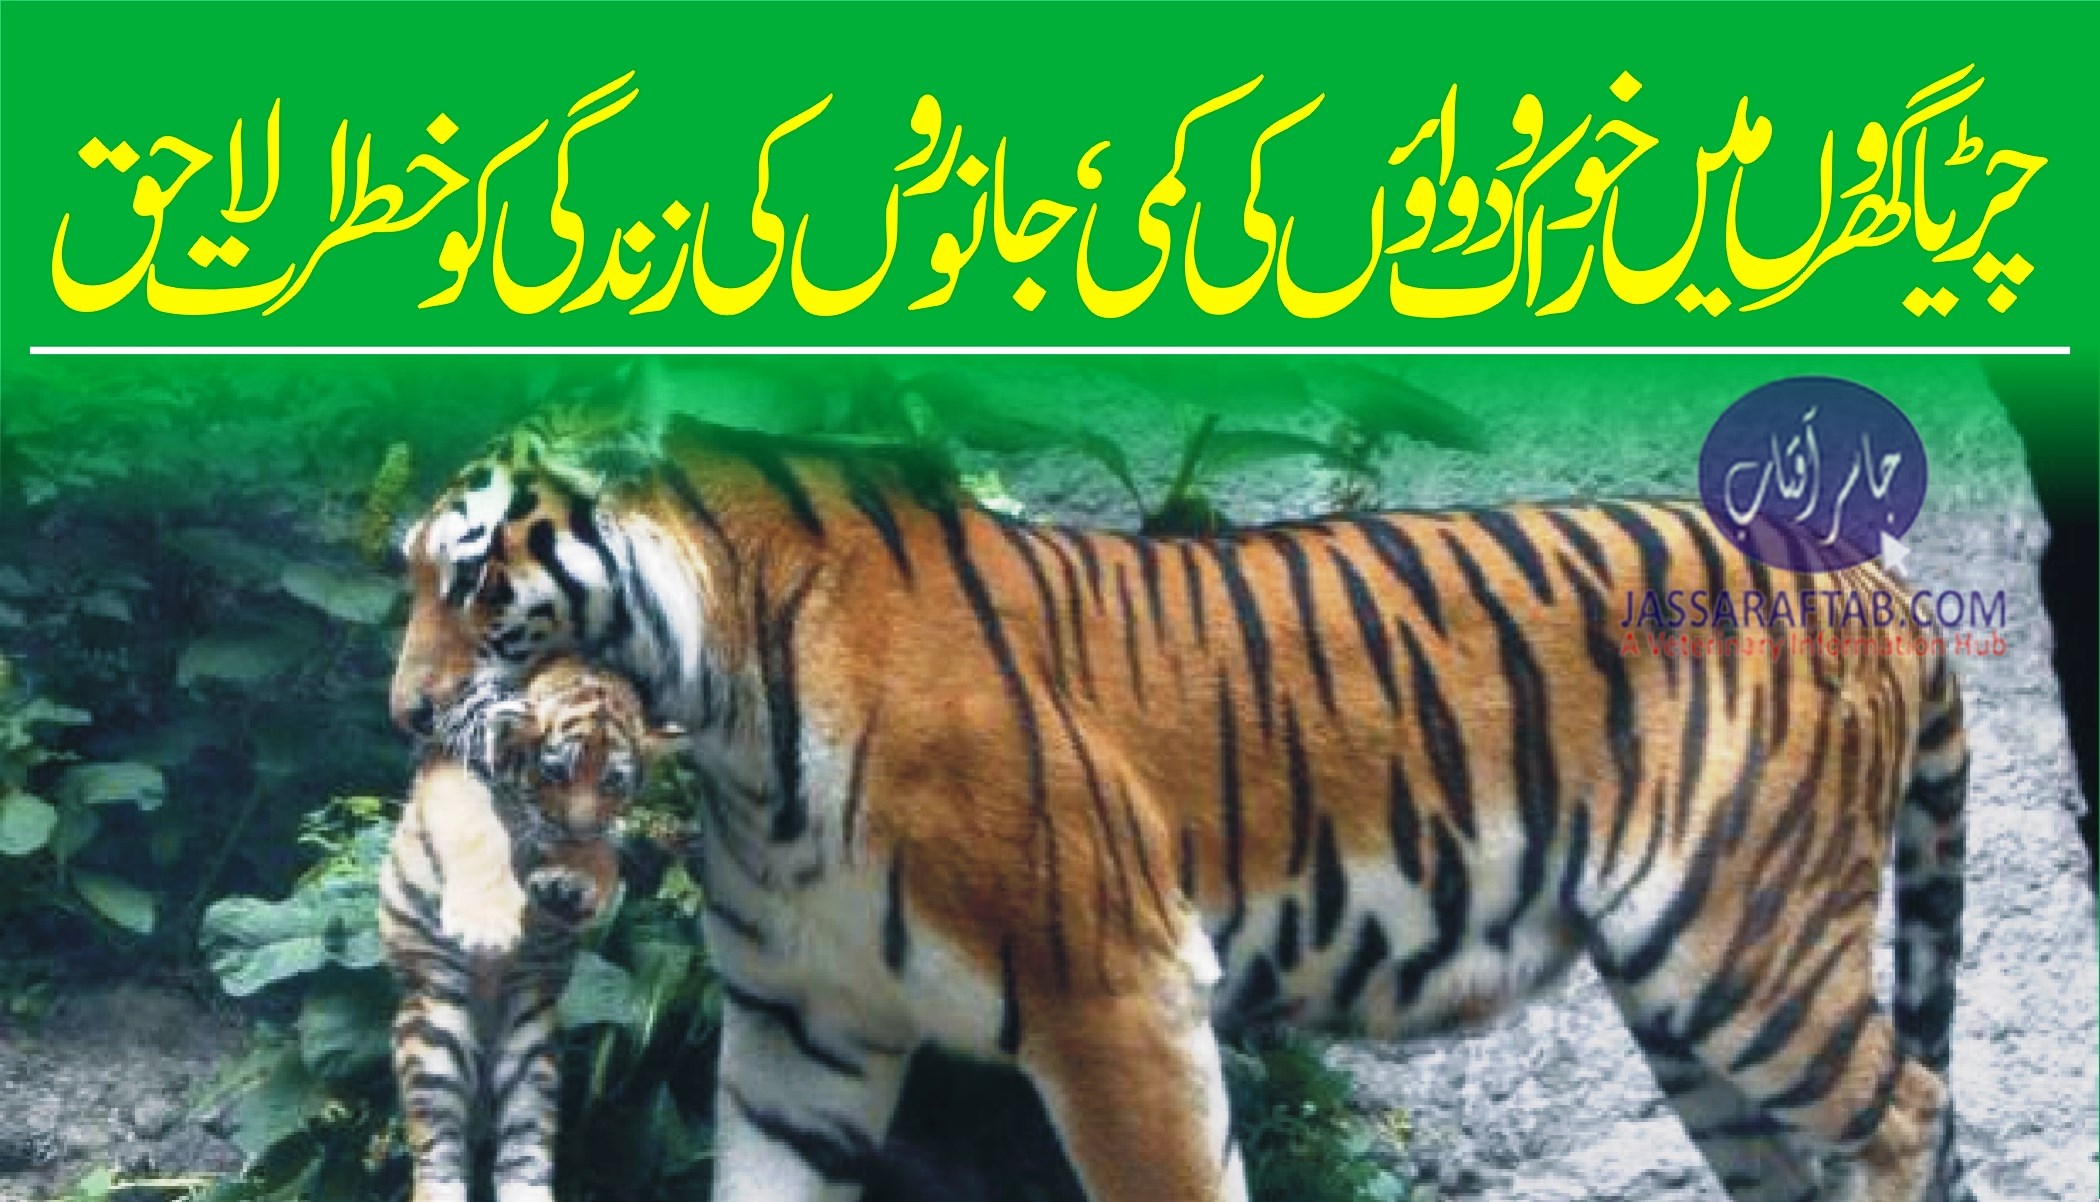 Shortage of feed for zoo animals